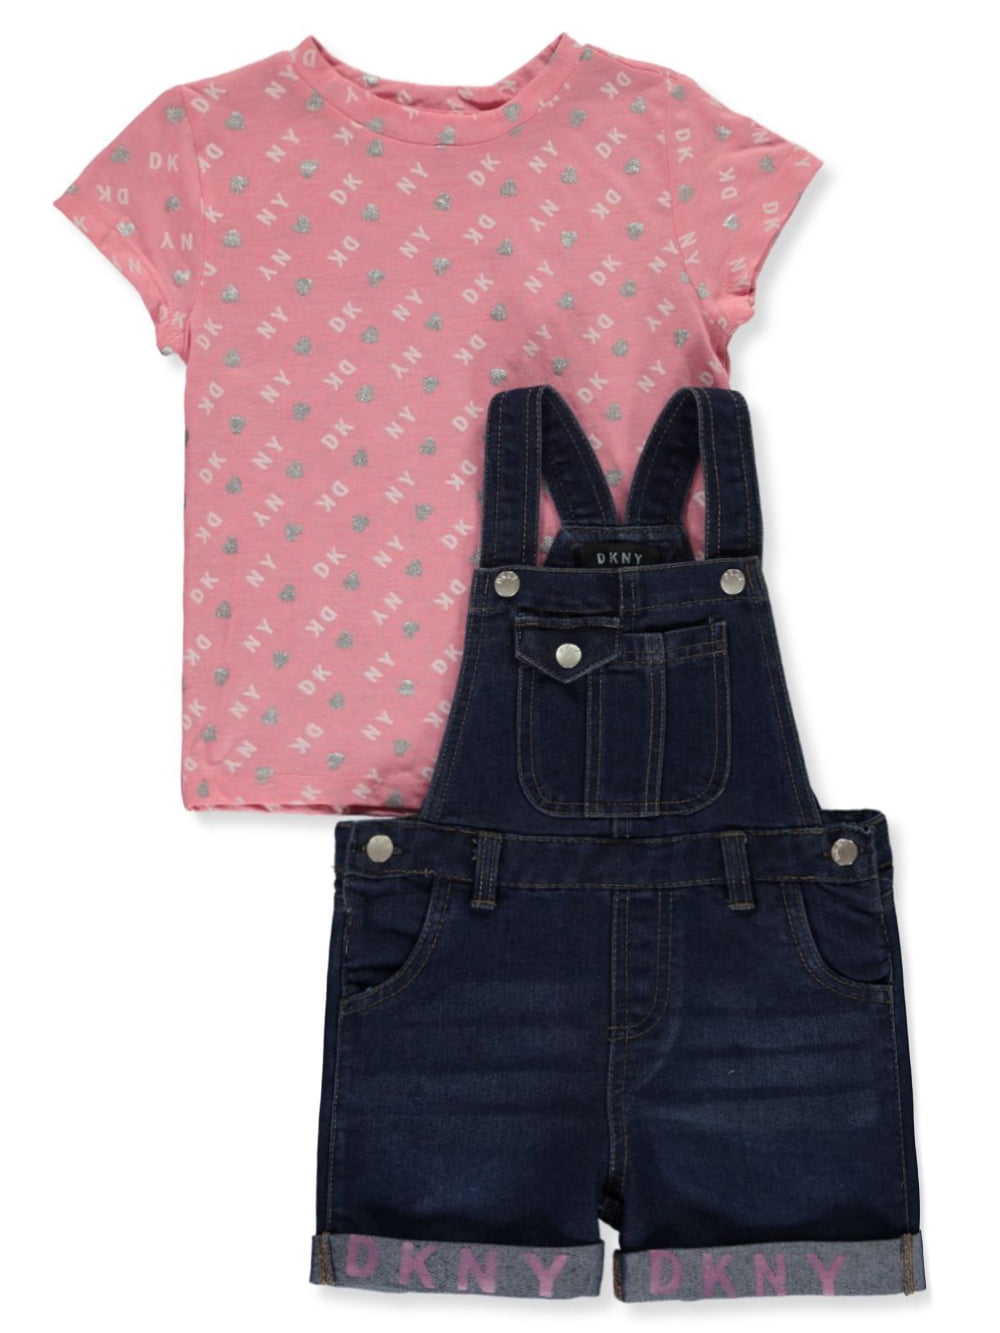 NEW Mud Pie 3 Pc Set PLAYGROUND SHORTIES Size 2T Dots Stripe & Solid Baby Girl 